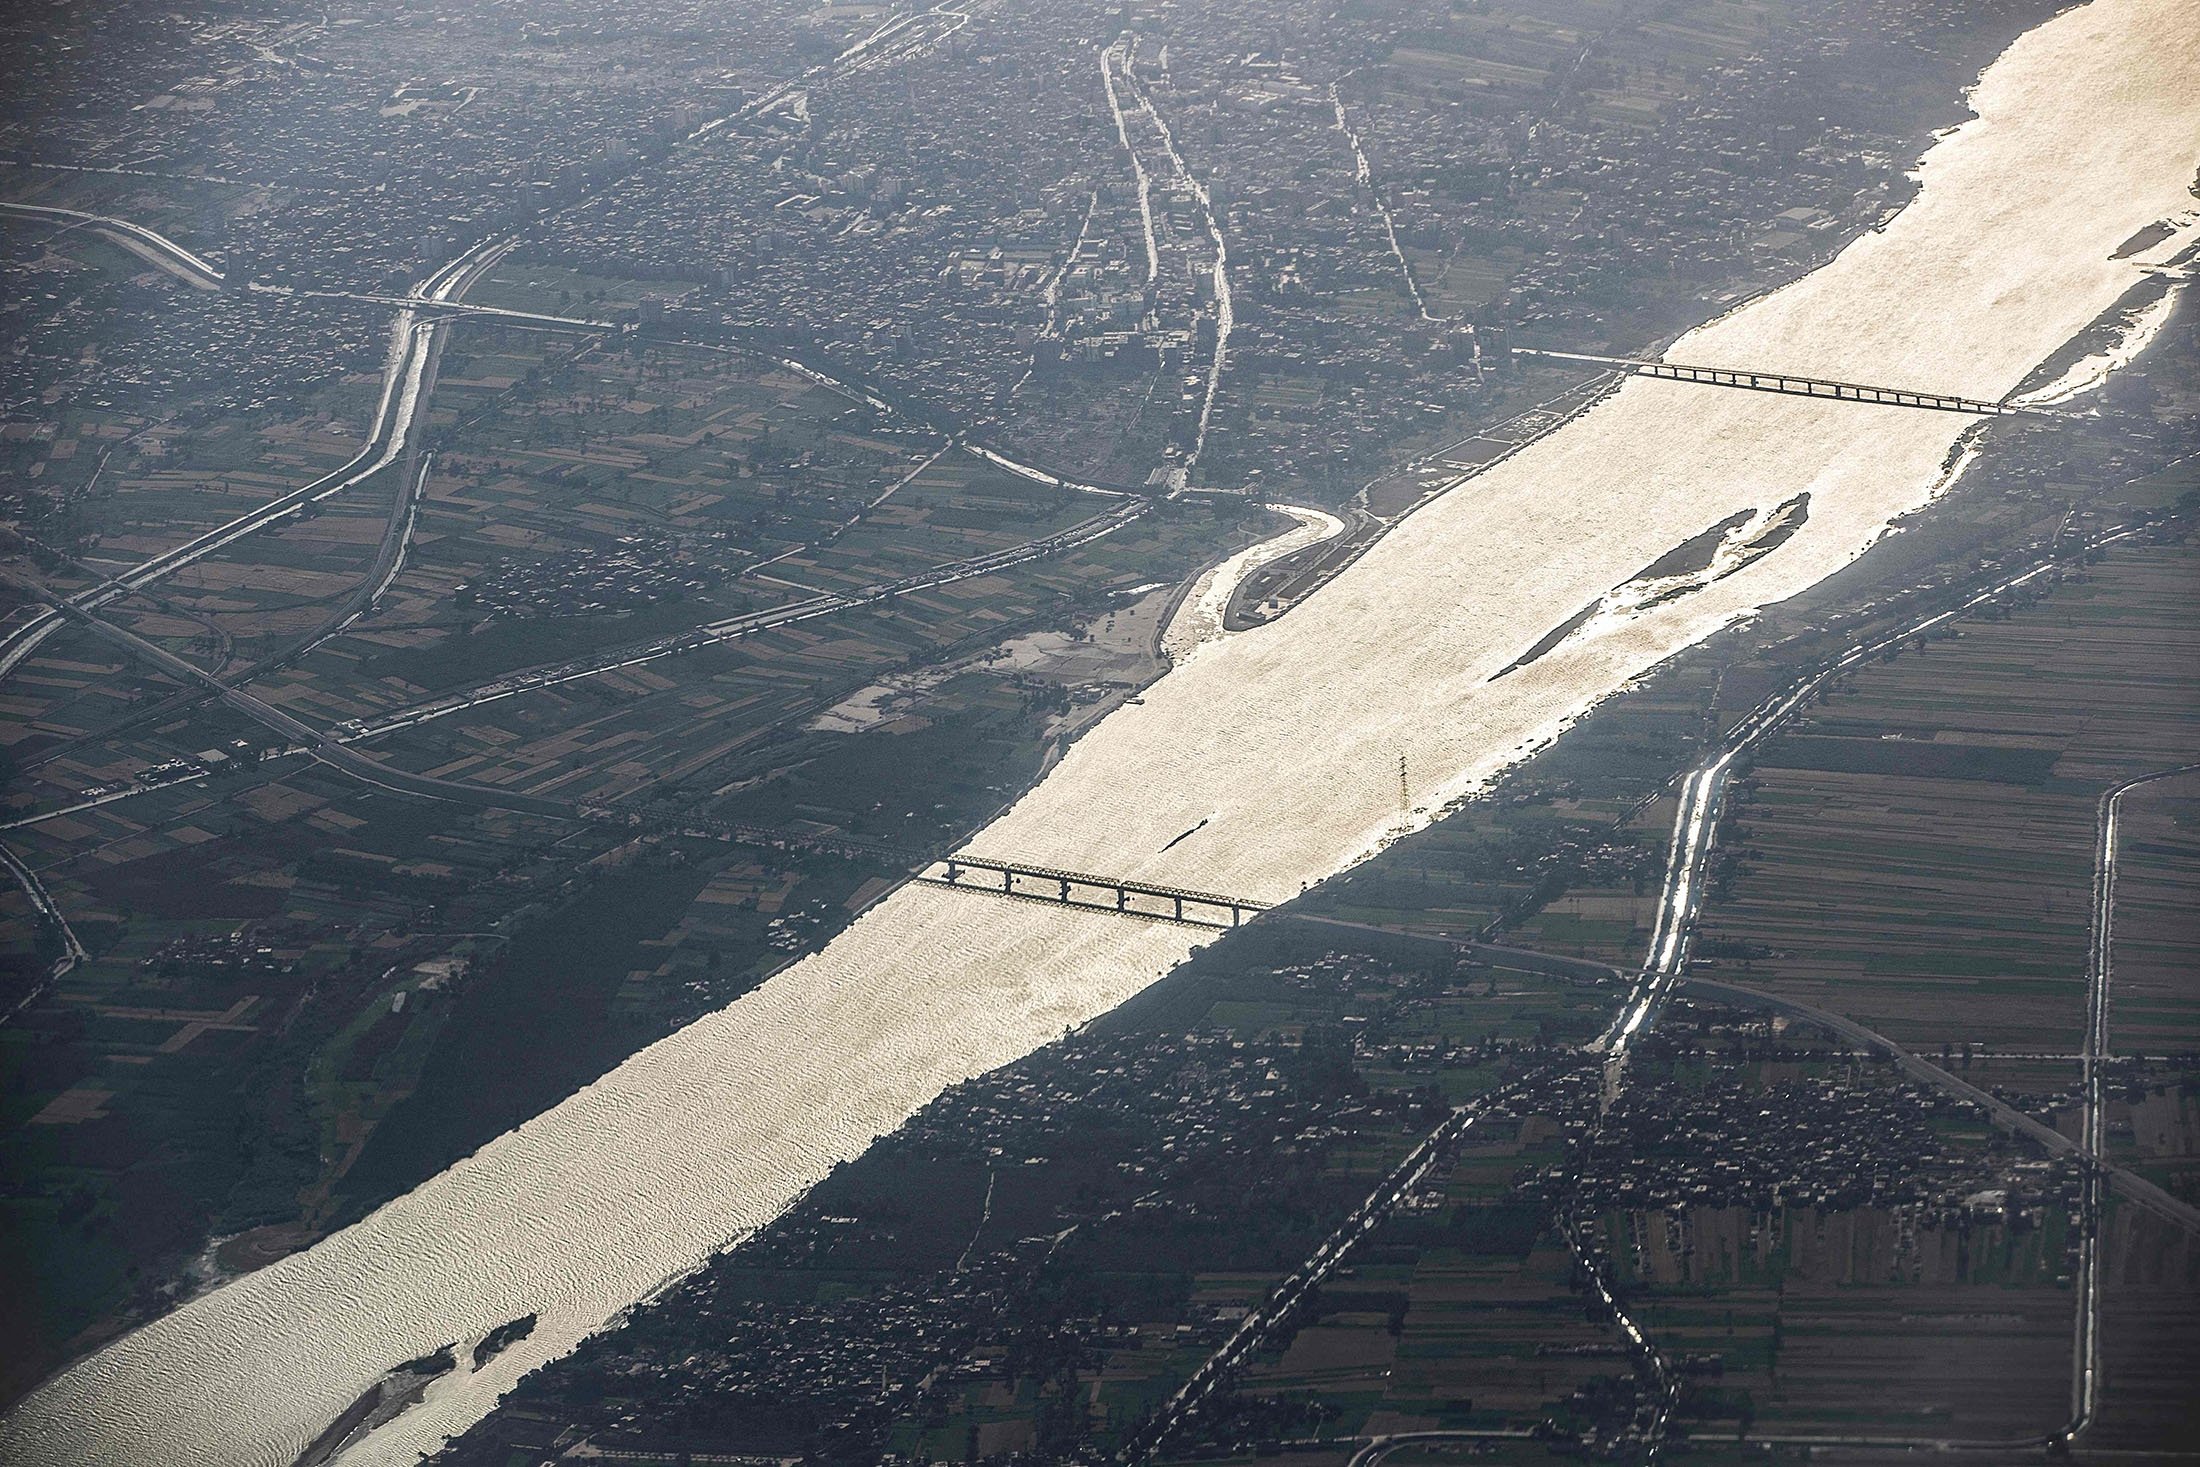 An aerial view of the Nile river passing by the southern city of Qena, Egypt, April 10, 2021. (AFP Photo)